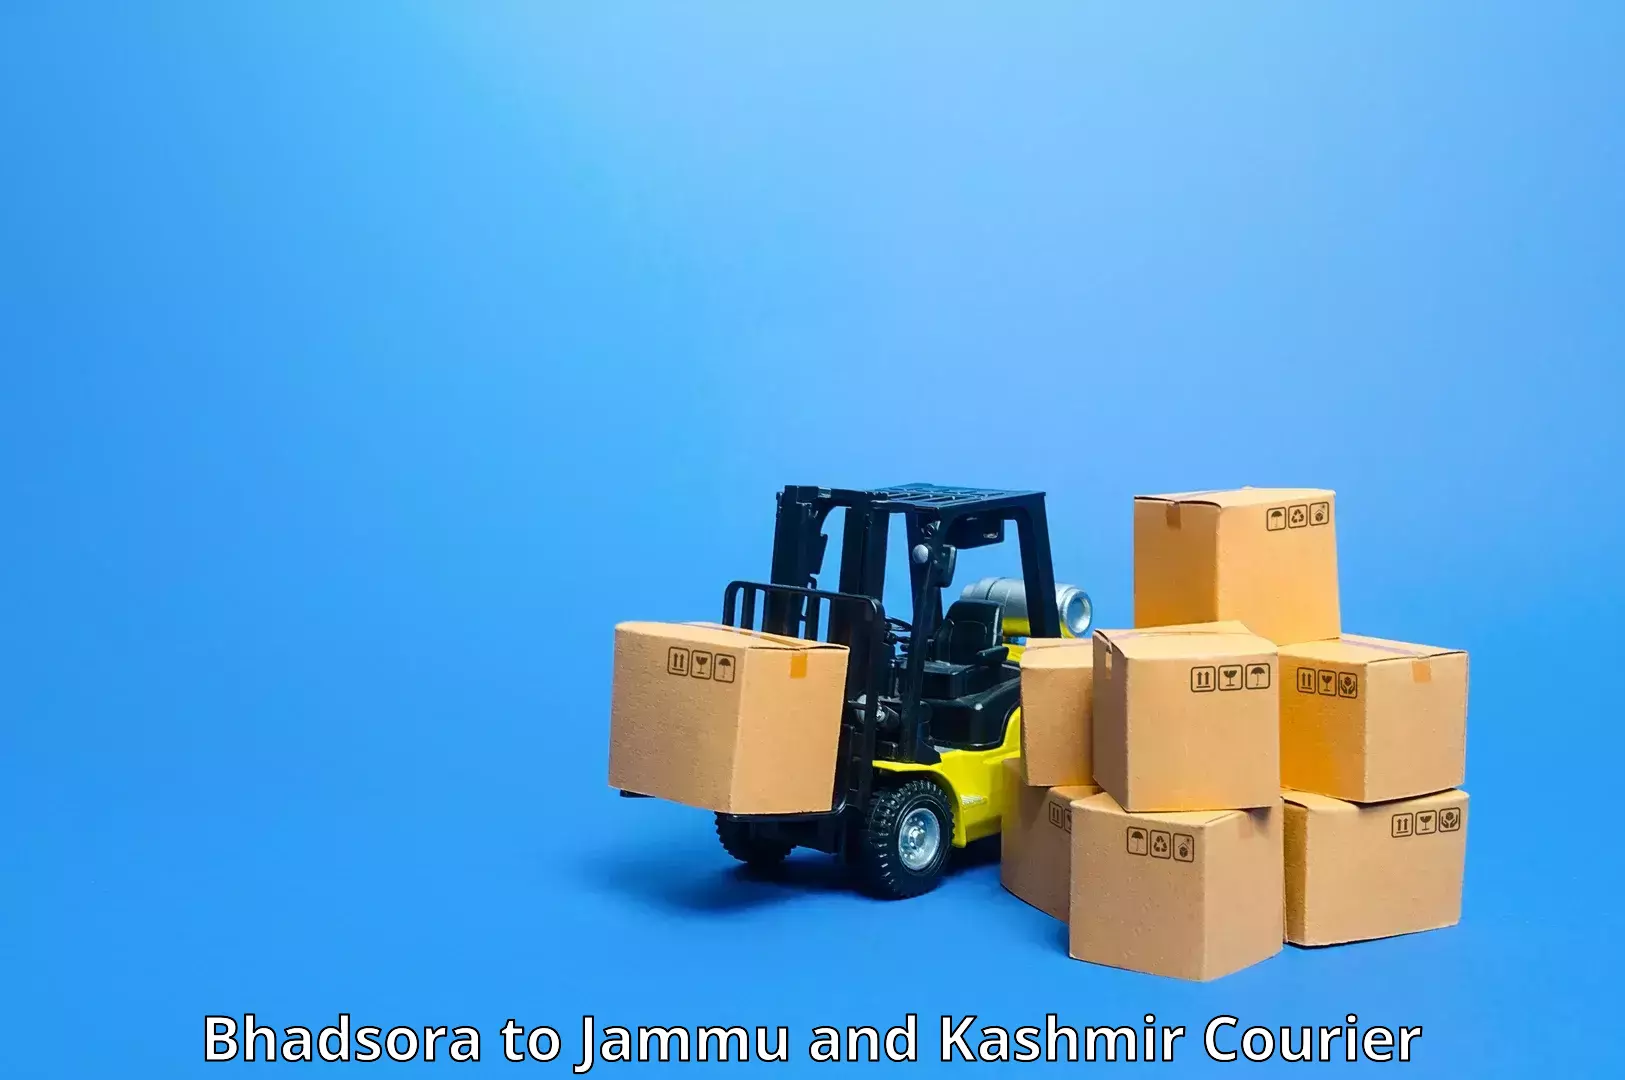 Express package handling Bhadsora to Sopore